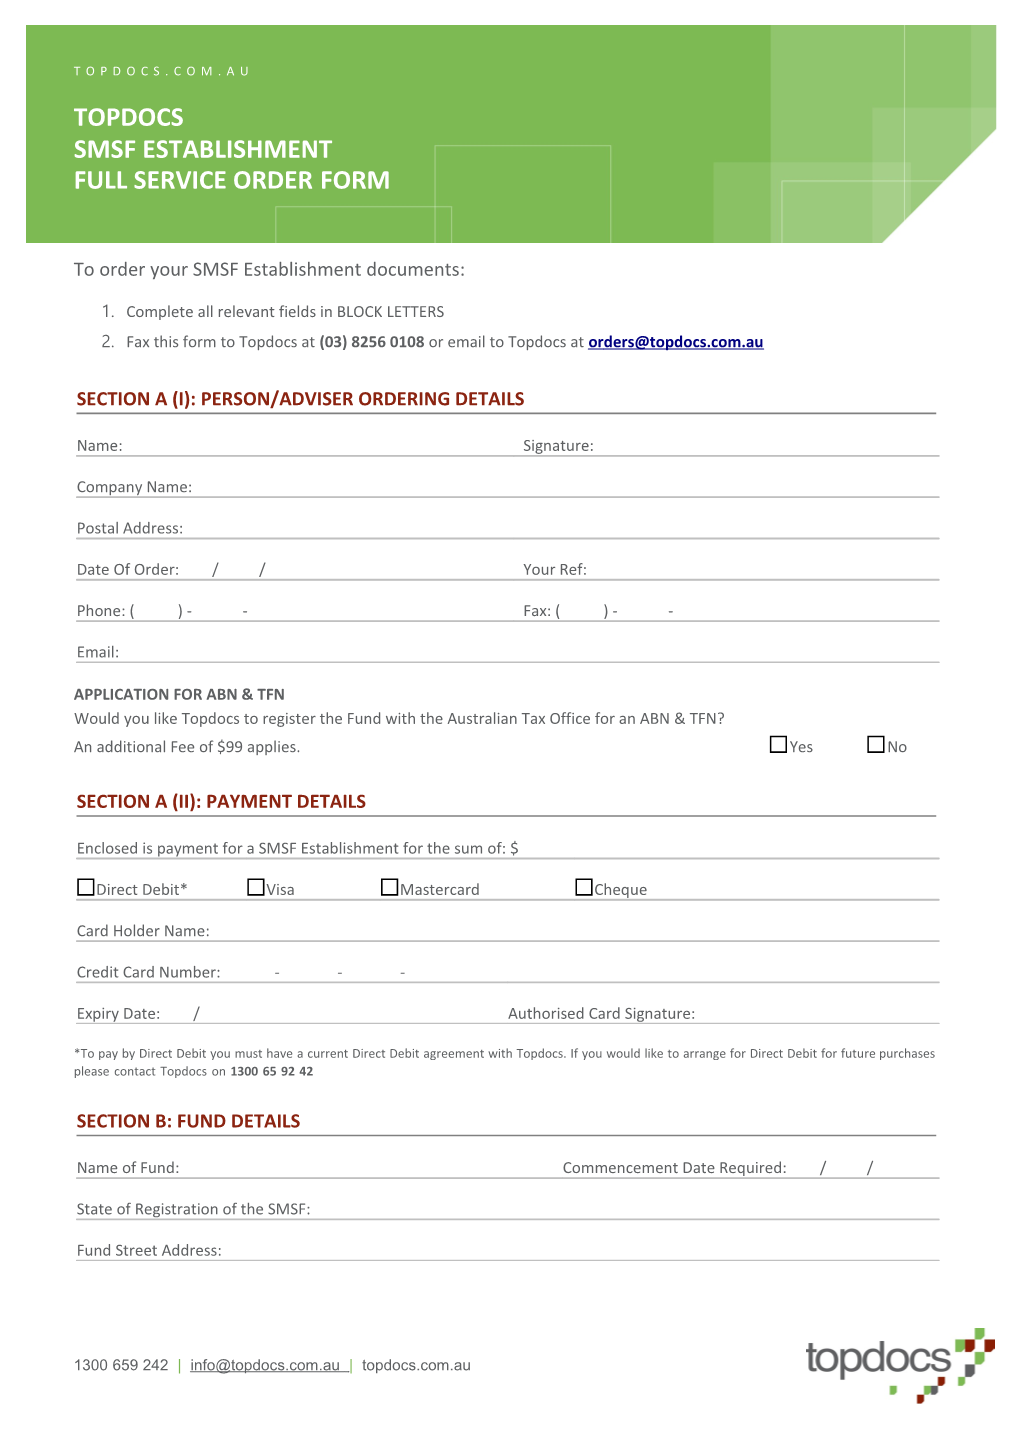 To Order Your SMSF Establishment Documents